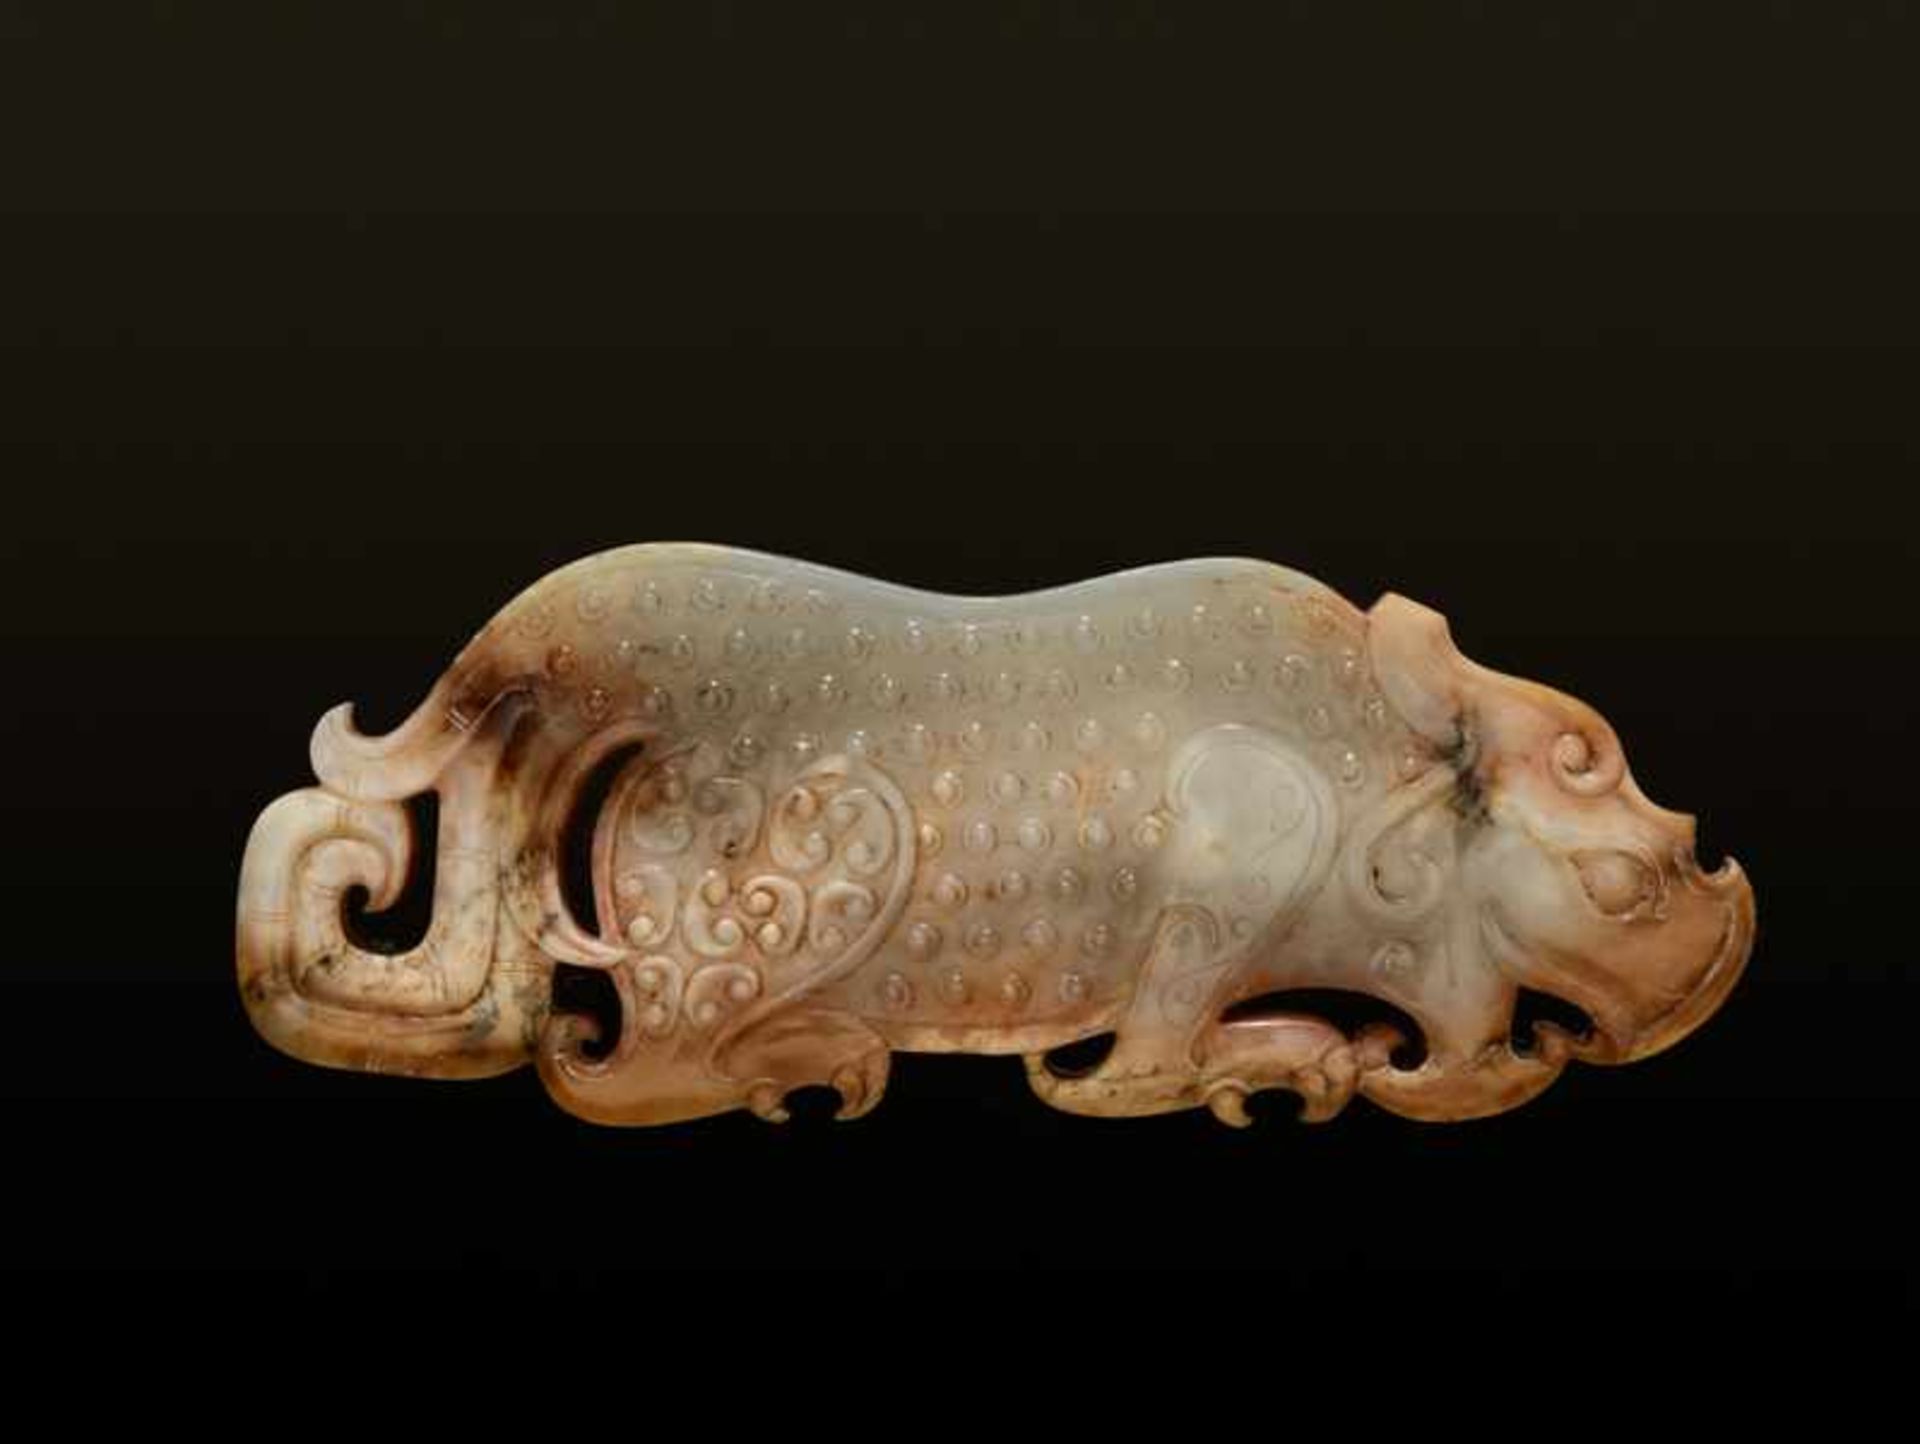 AN EXQUISITE PLAQUE IN WHITE TRANSLUCENT JADE FINELY CARVED IN THE SHAPE OF A CROUCHING TIGER - Image 2 of 4